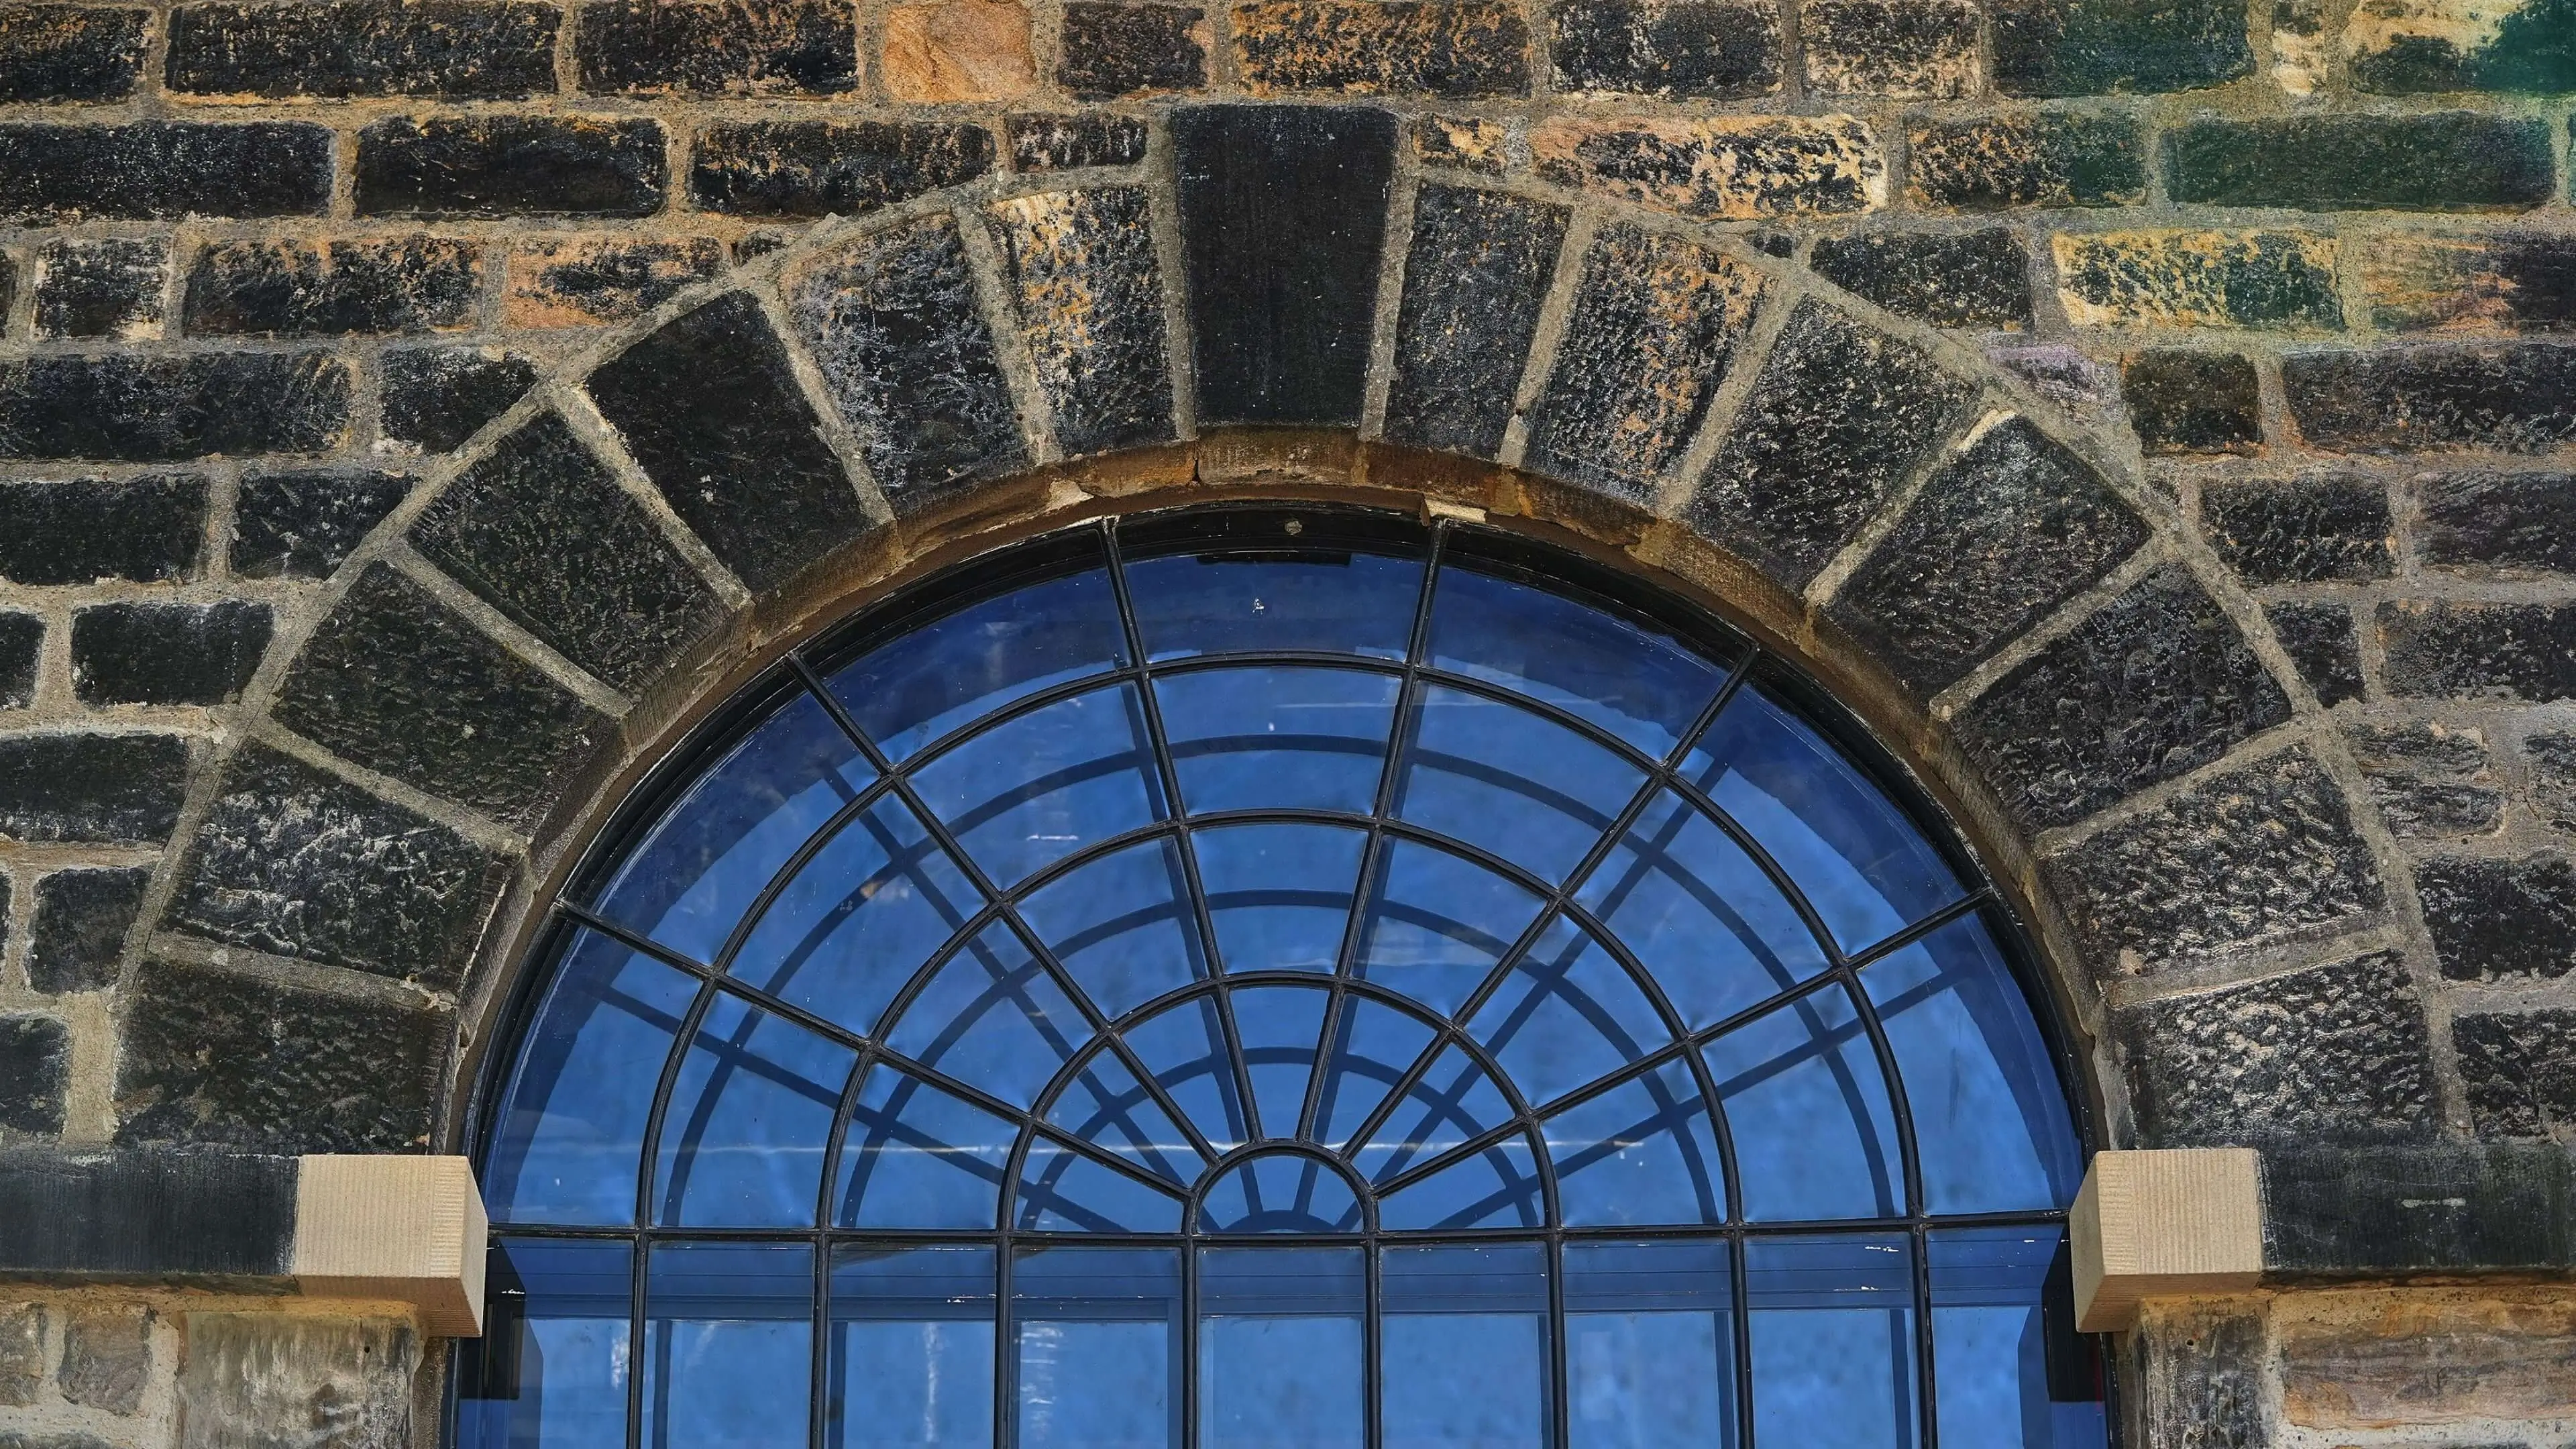 Panes of glass in an arch